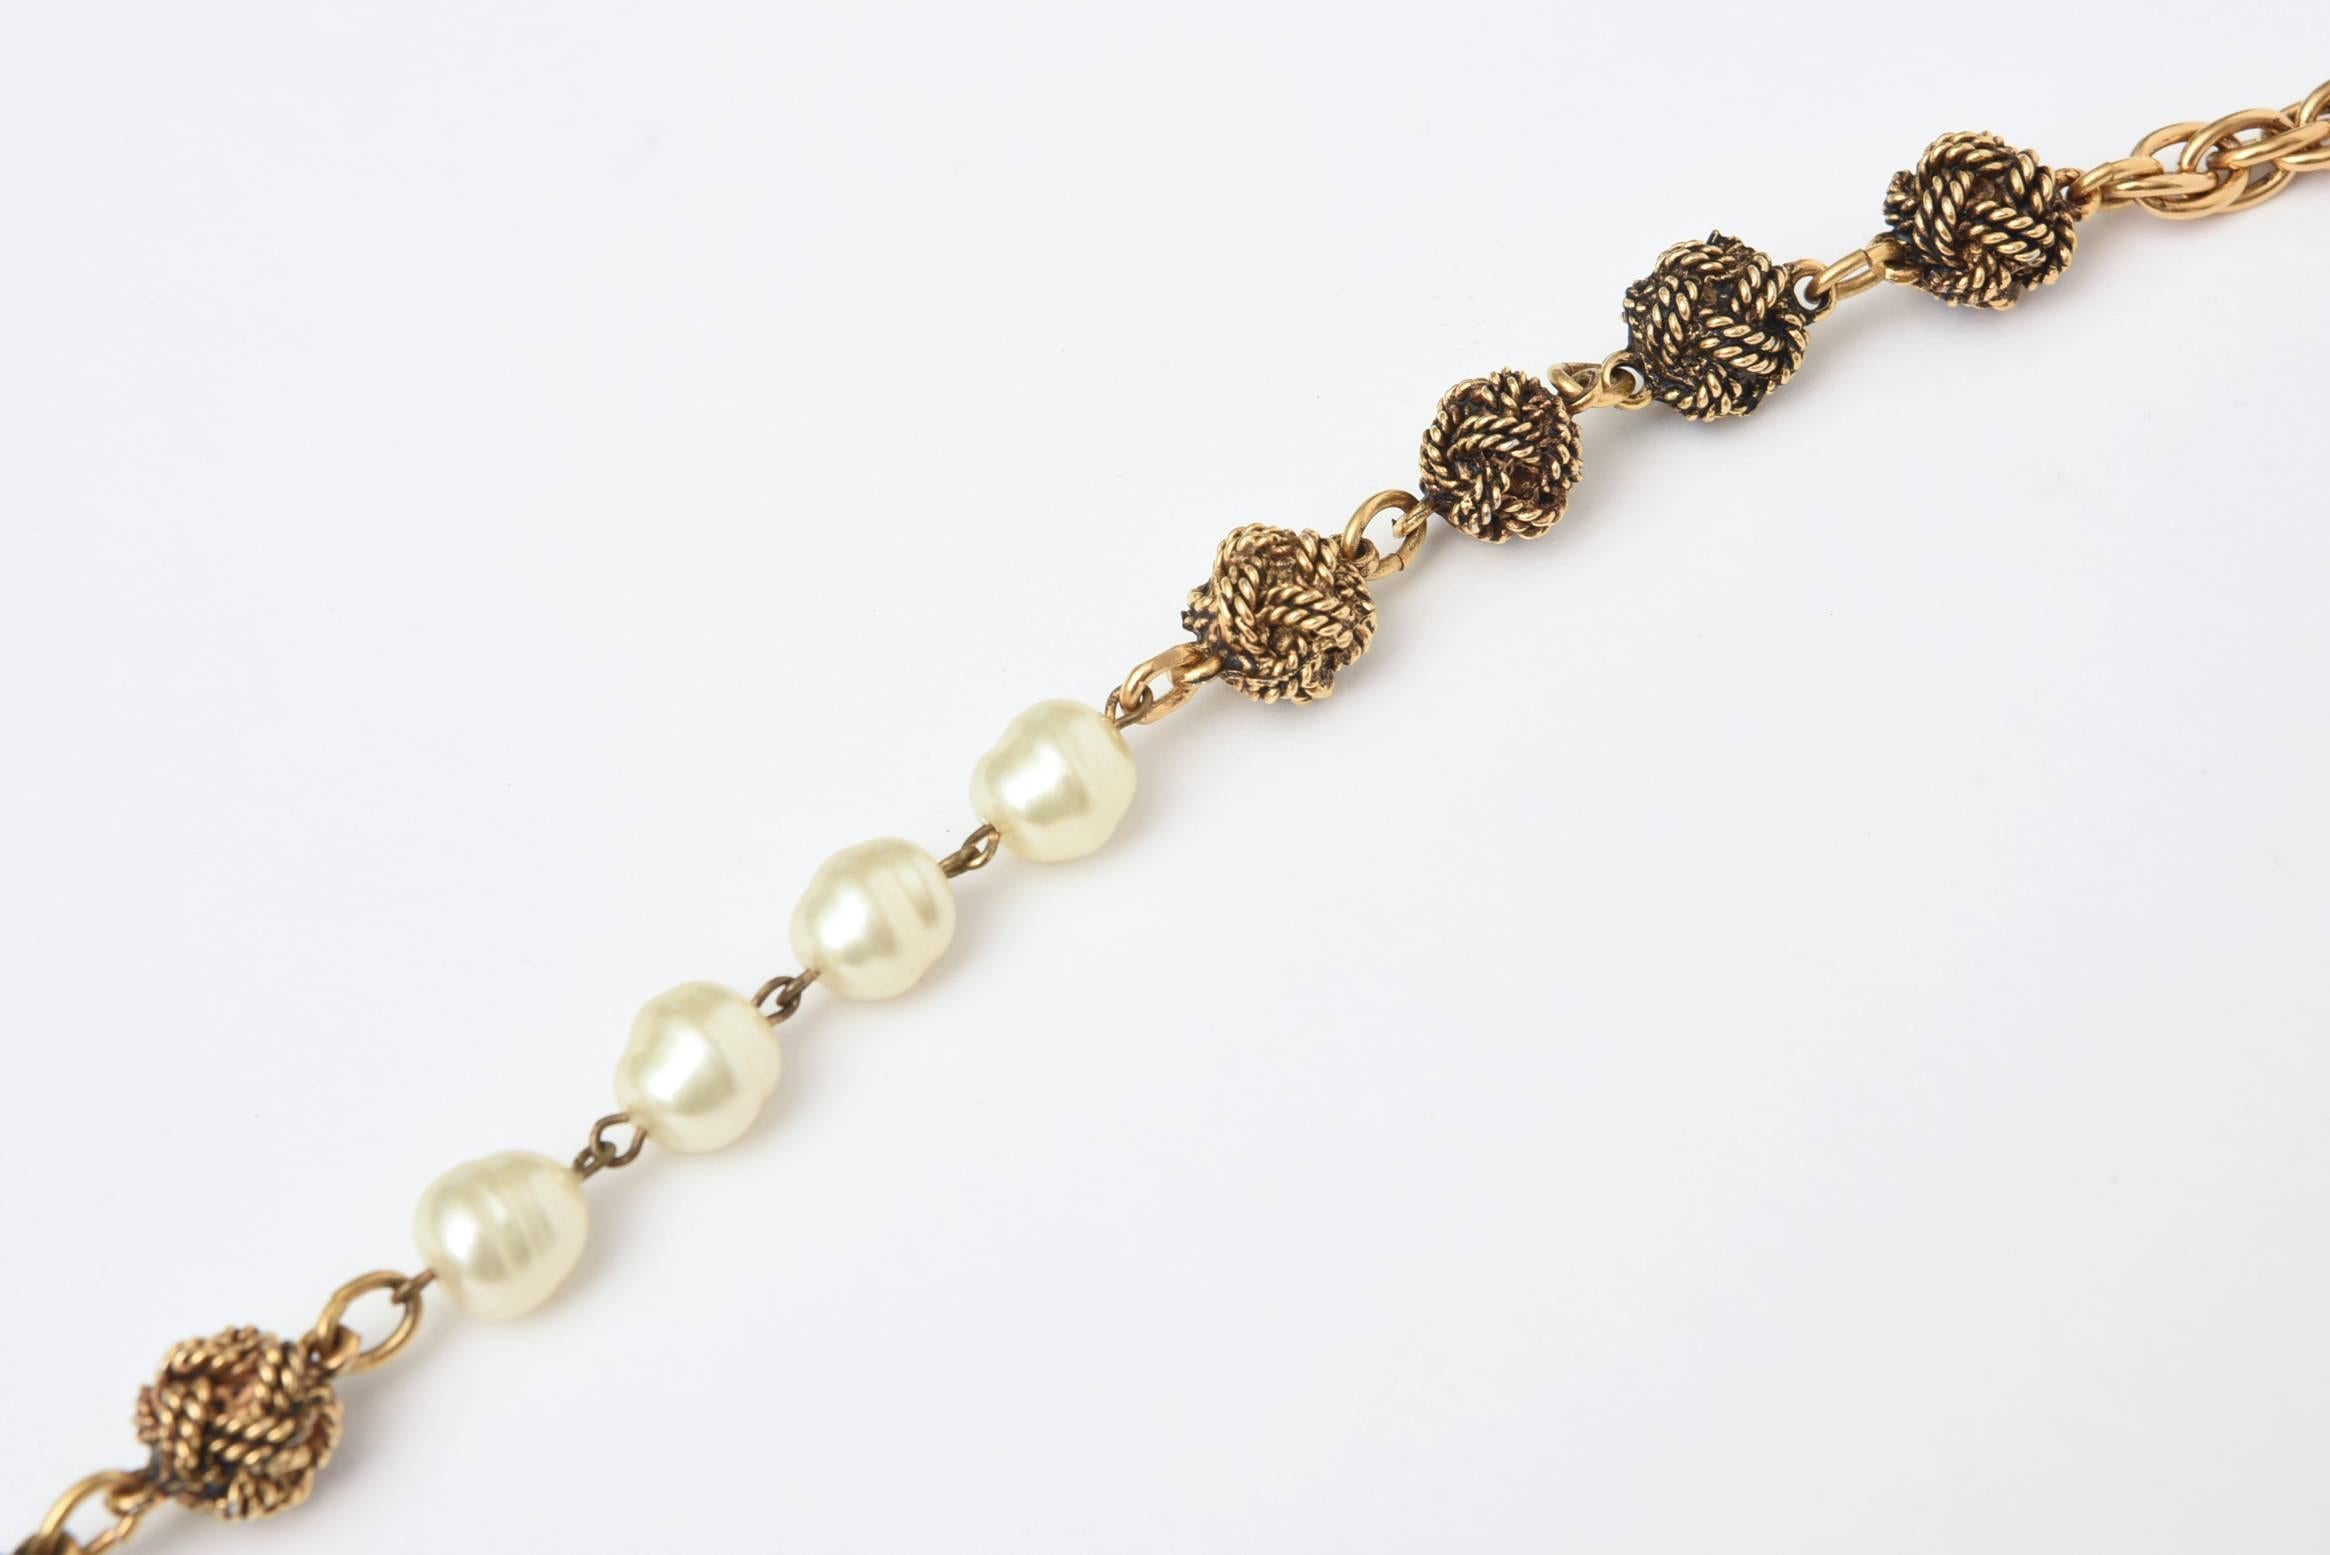 This classic and forever Chanel long necklace has knots in a darker gold plated gilt metal with a lighter gold plated gilt metal link interspersed with gold tone love knot stations interspersed with Chanel nacre faux pearls and chains. It can be